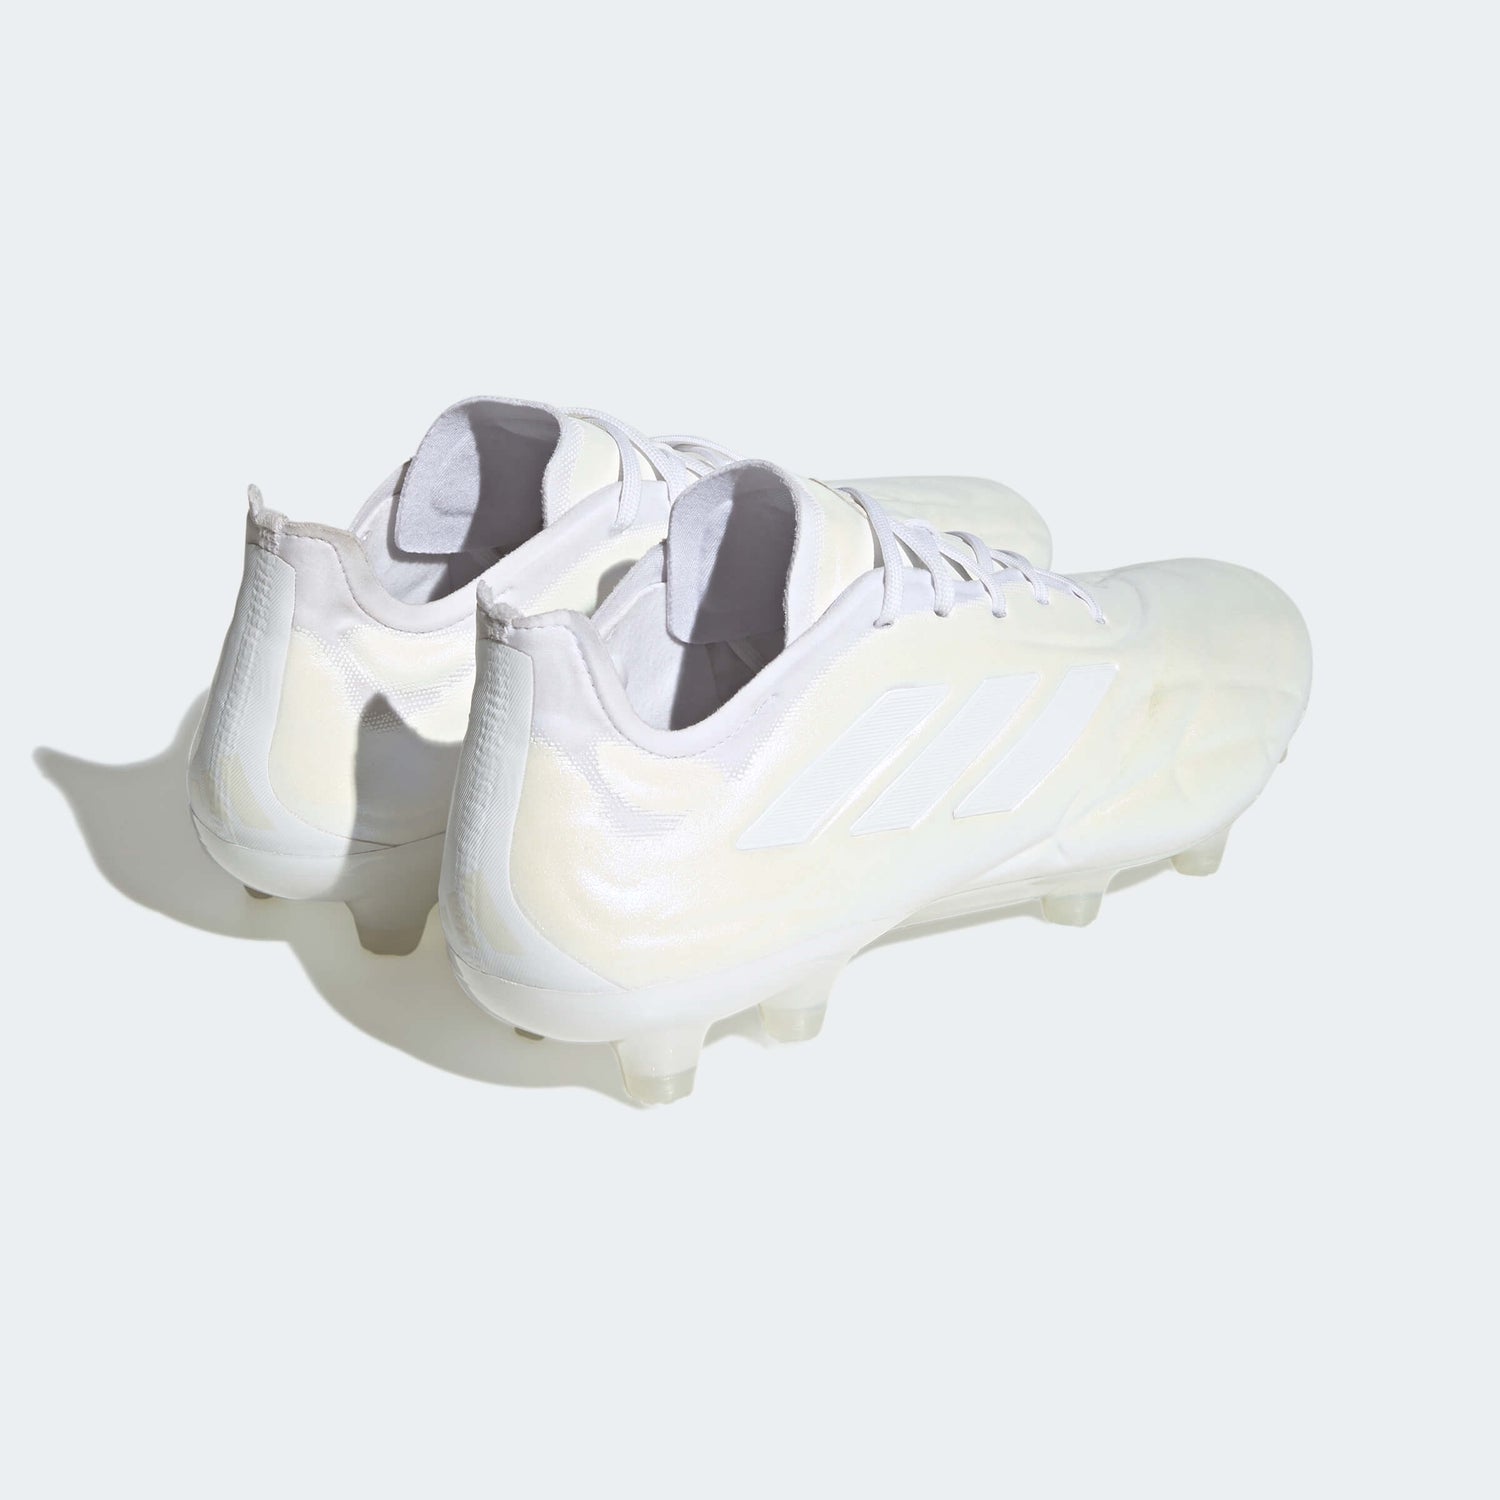 adidas Copa Pure.1 FG -  Pearlized Pack (SP23) (Pair - Back Lateral)